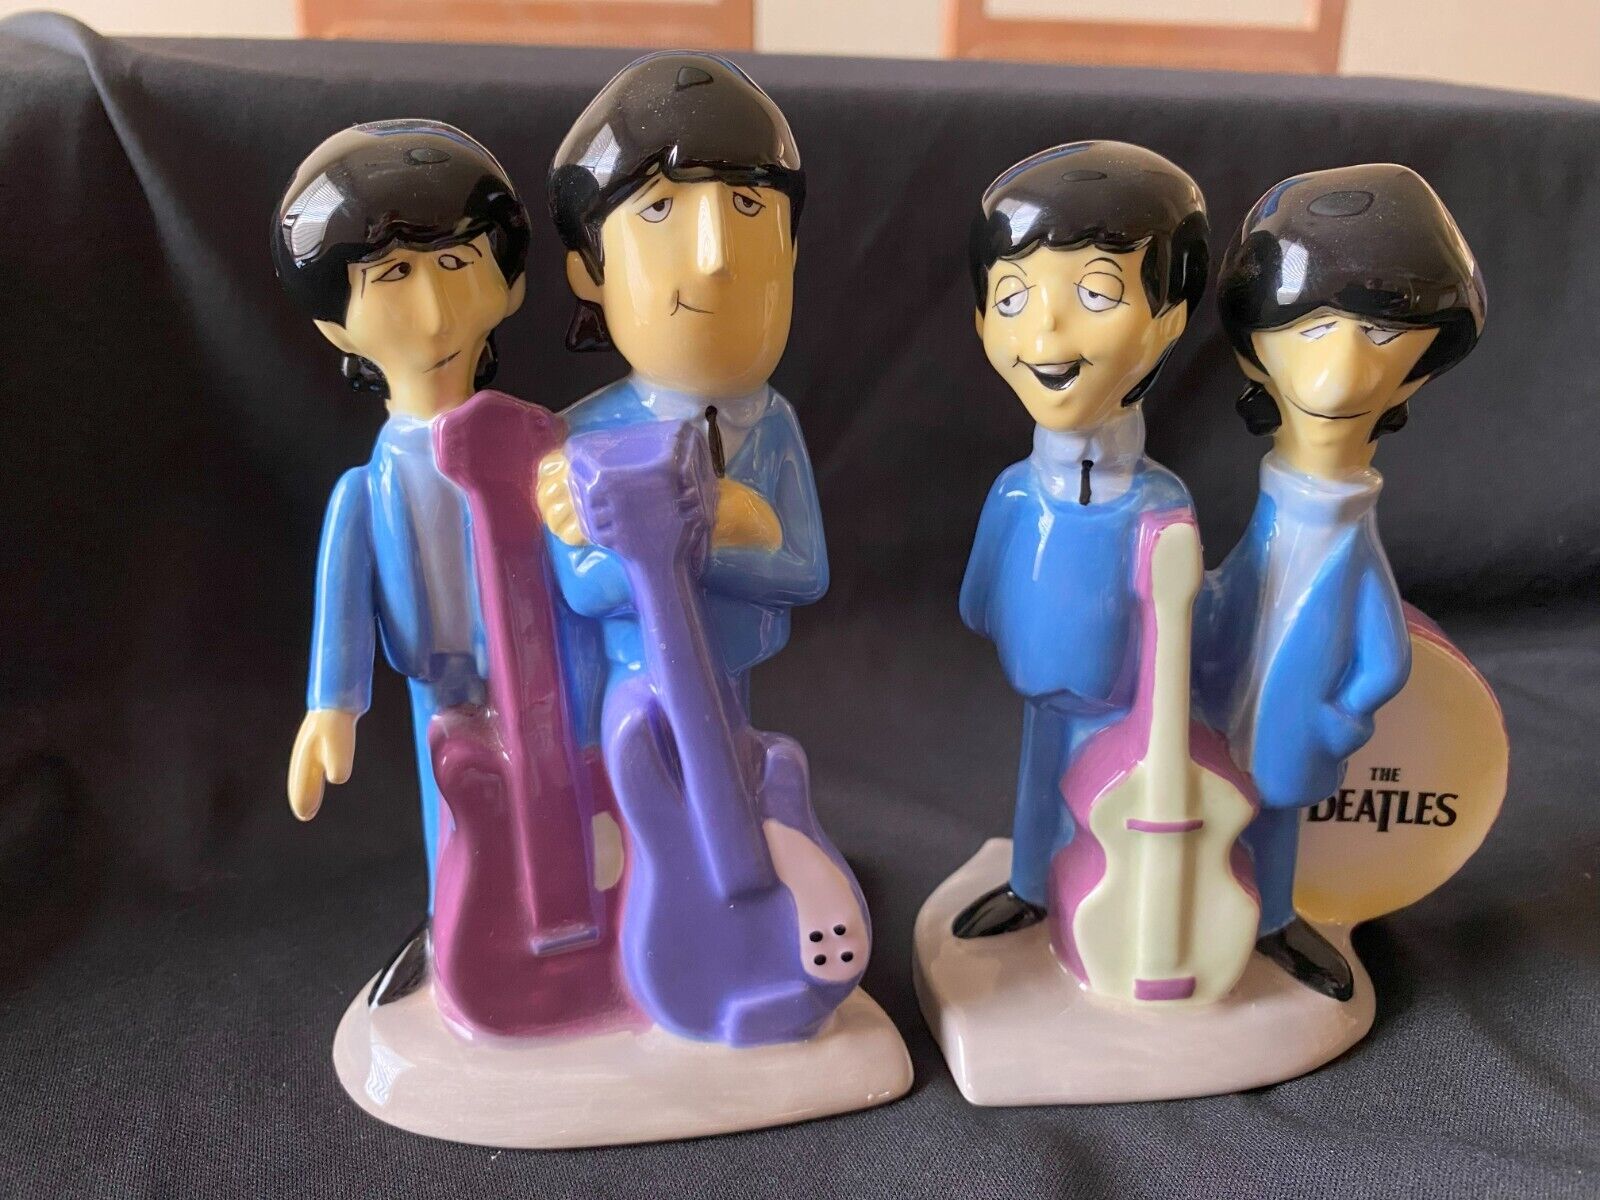 The Beatles Animated 2004   Salt & Pepper Shakers